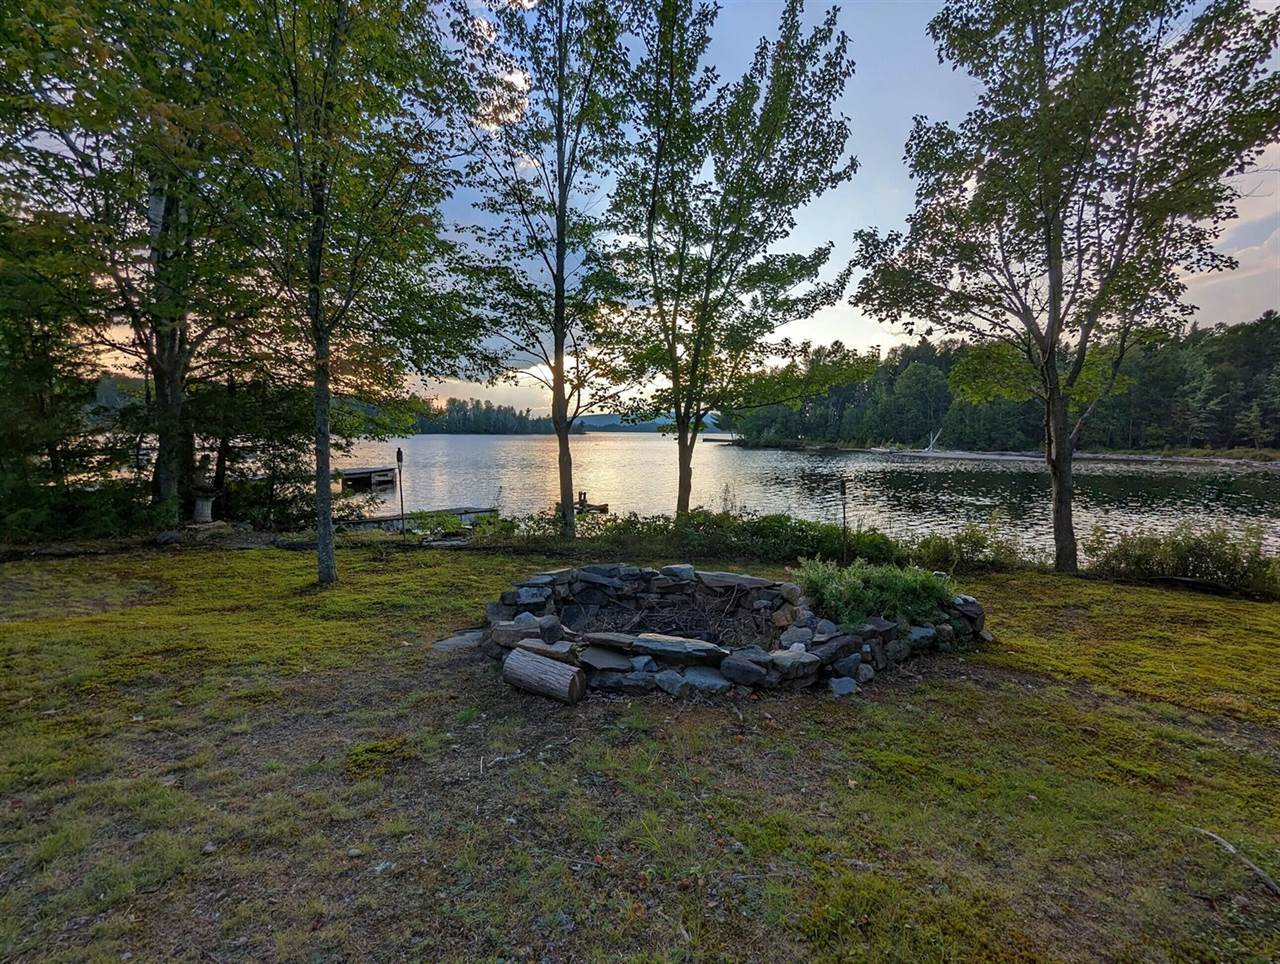 32 North Mud Cove Road, Lily Bay Township, ME 04441